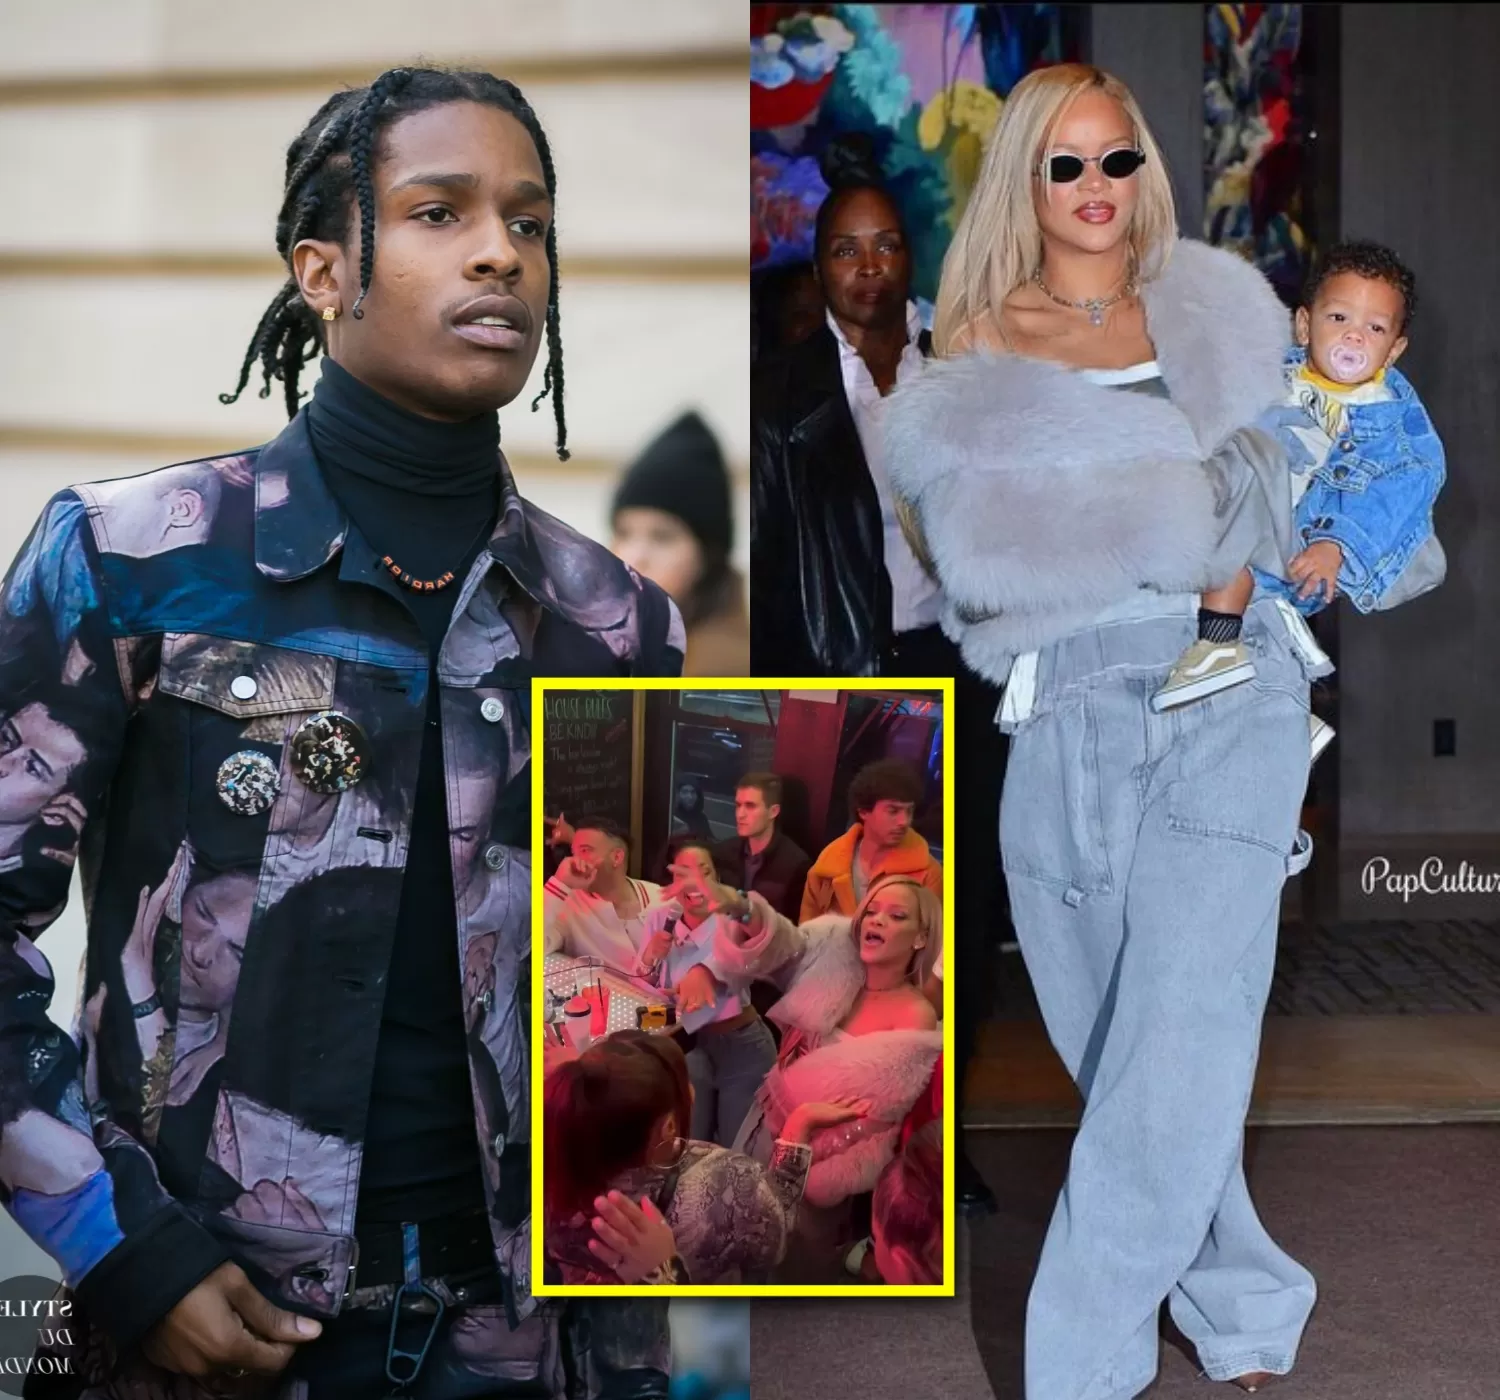 Cover Image for Rihanna and A$AP Rocky vs RZA: Karaoke Battle Following Son’s 2nd Birthday Party